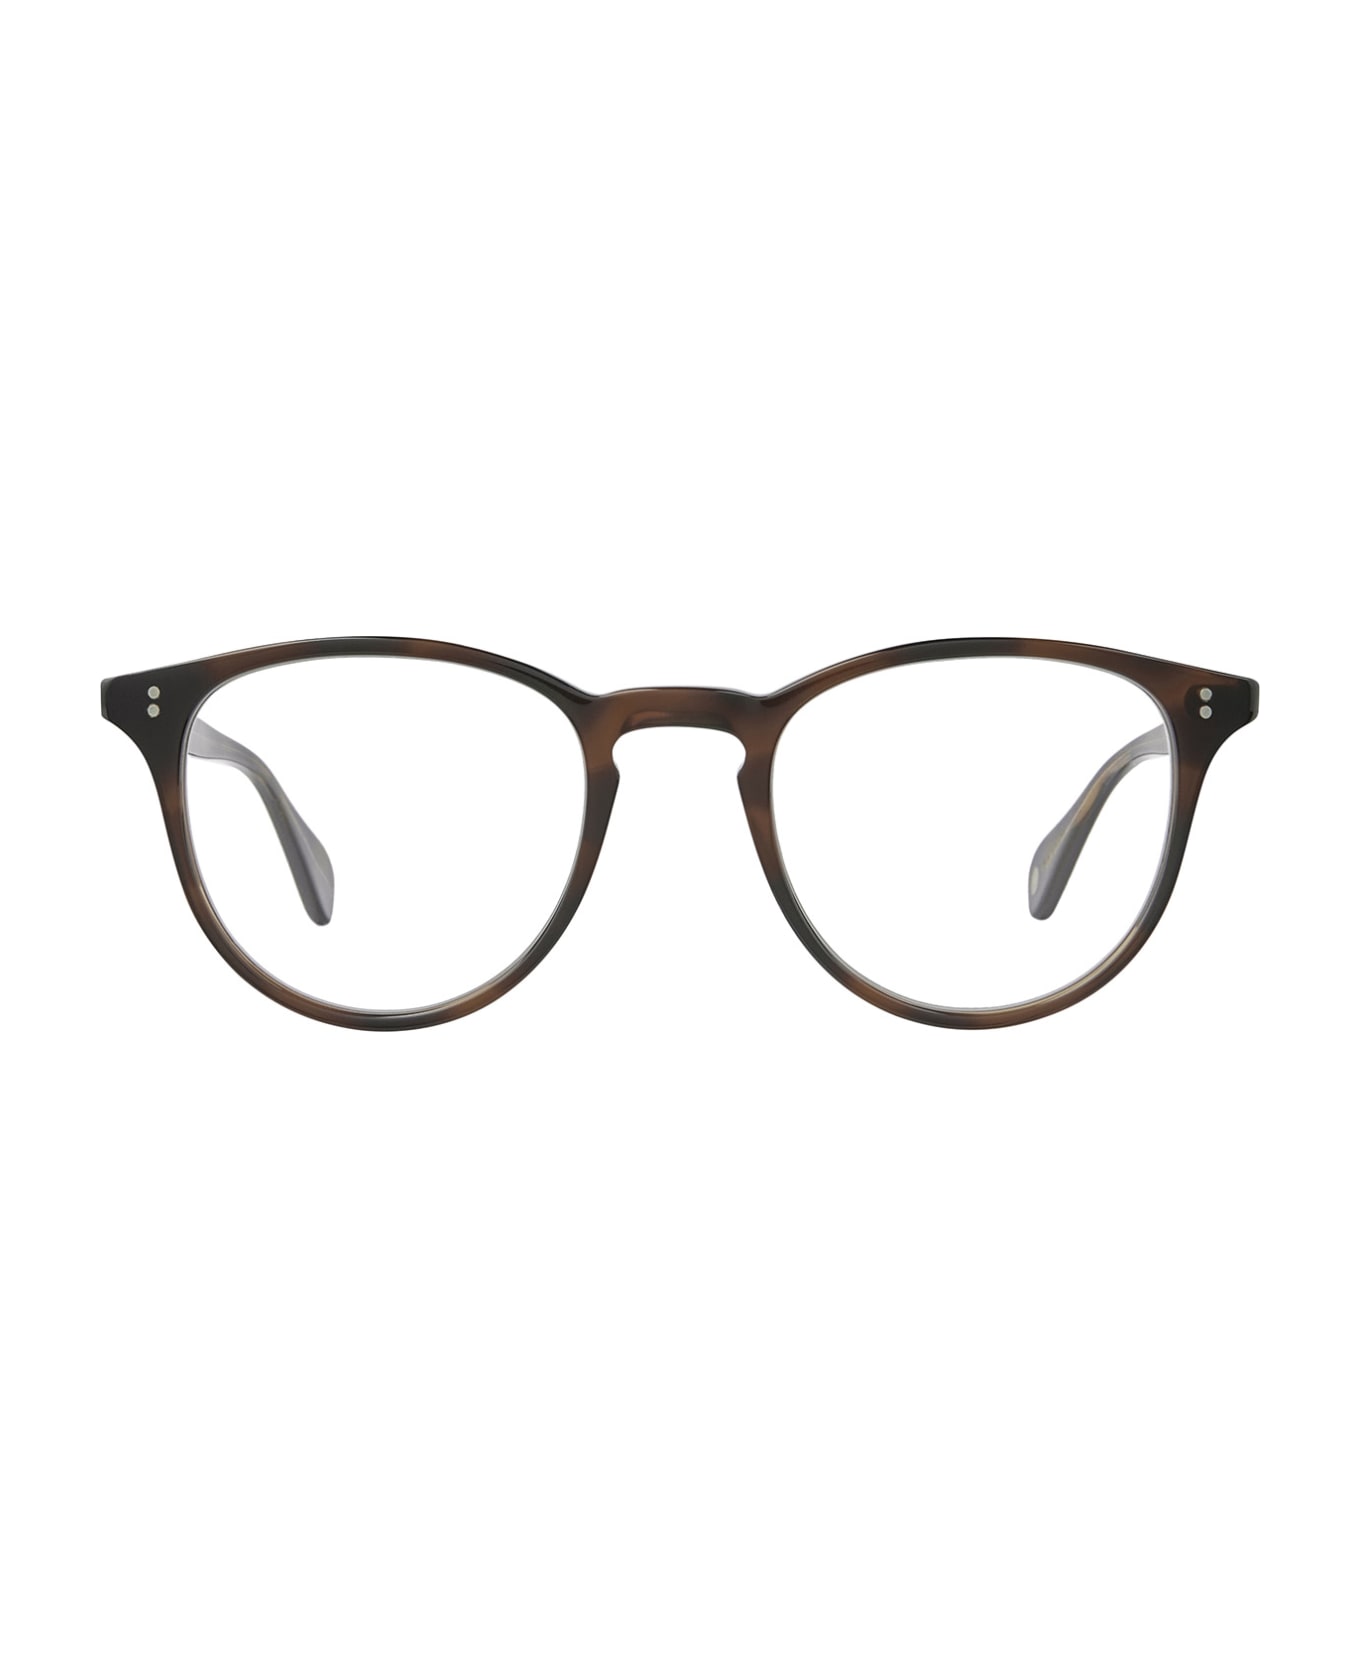 Garrett Leight Manzanita Spotted Brown Shell Glasses - Spotted Brown Shell